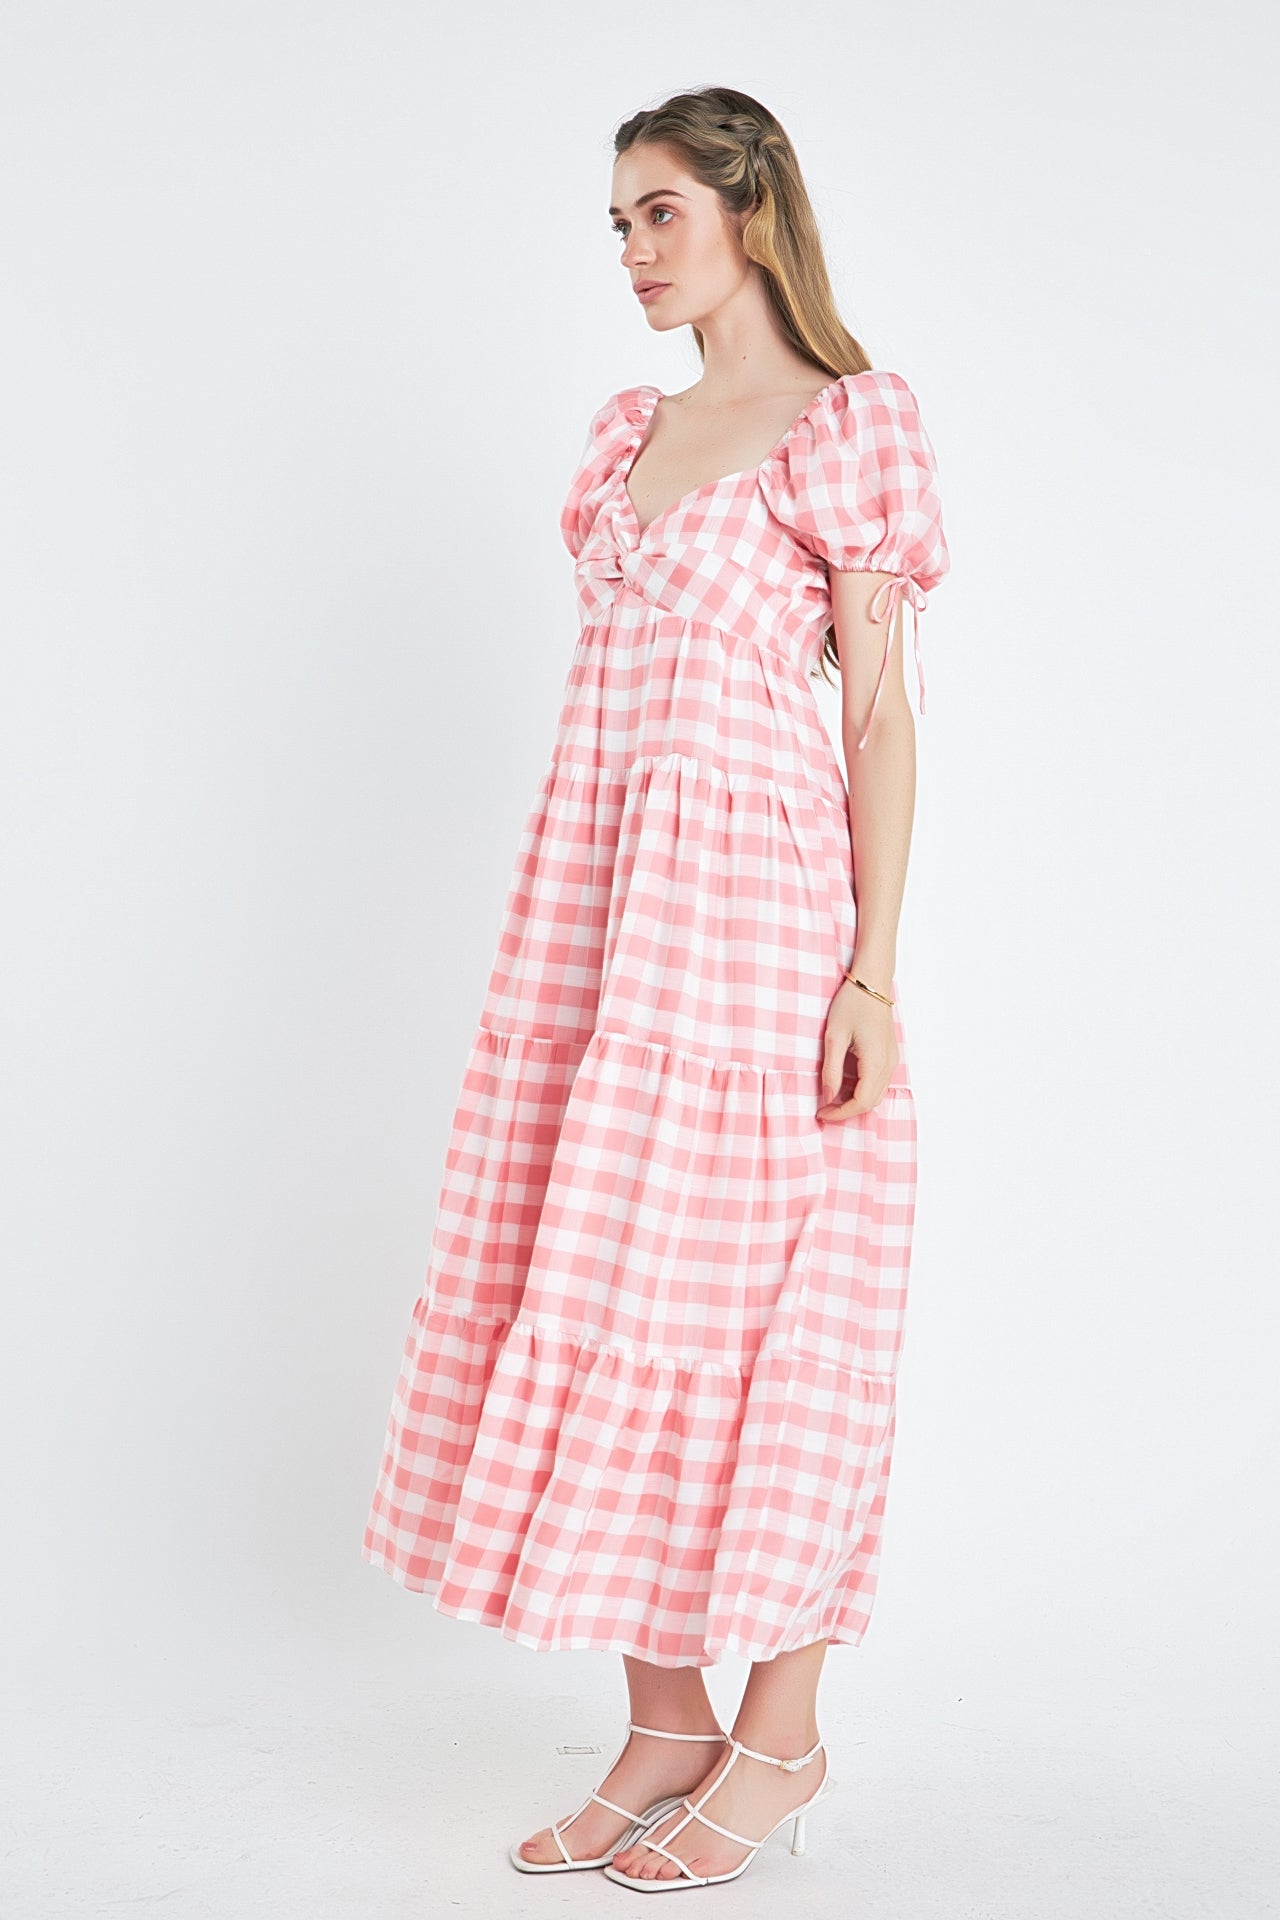 ENGLISH FACTORY - Knotted Gingham Dress - DRESSES available at Objectrare